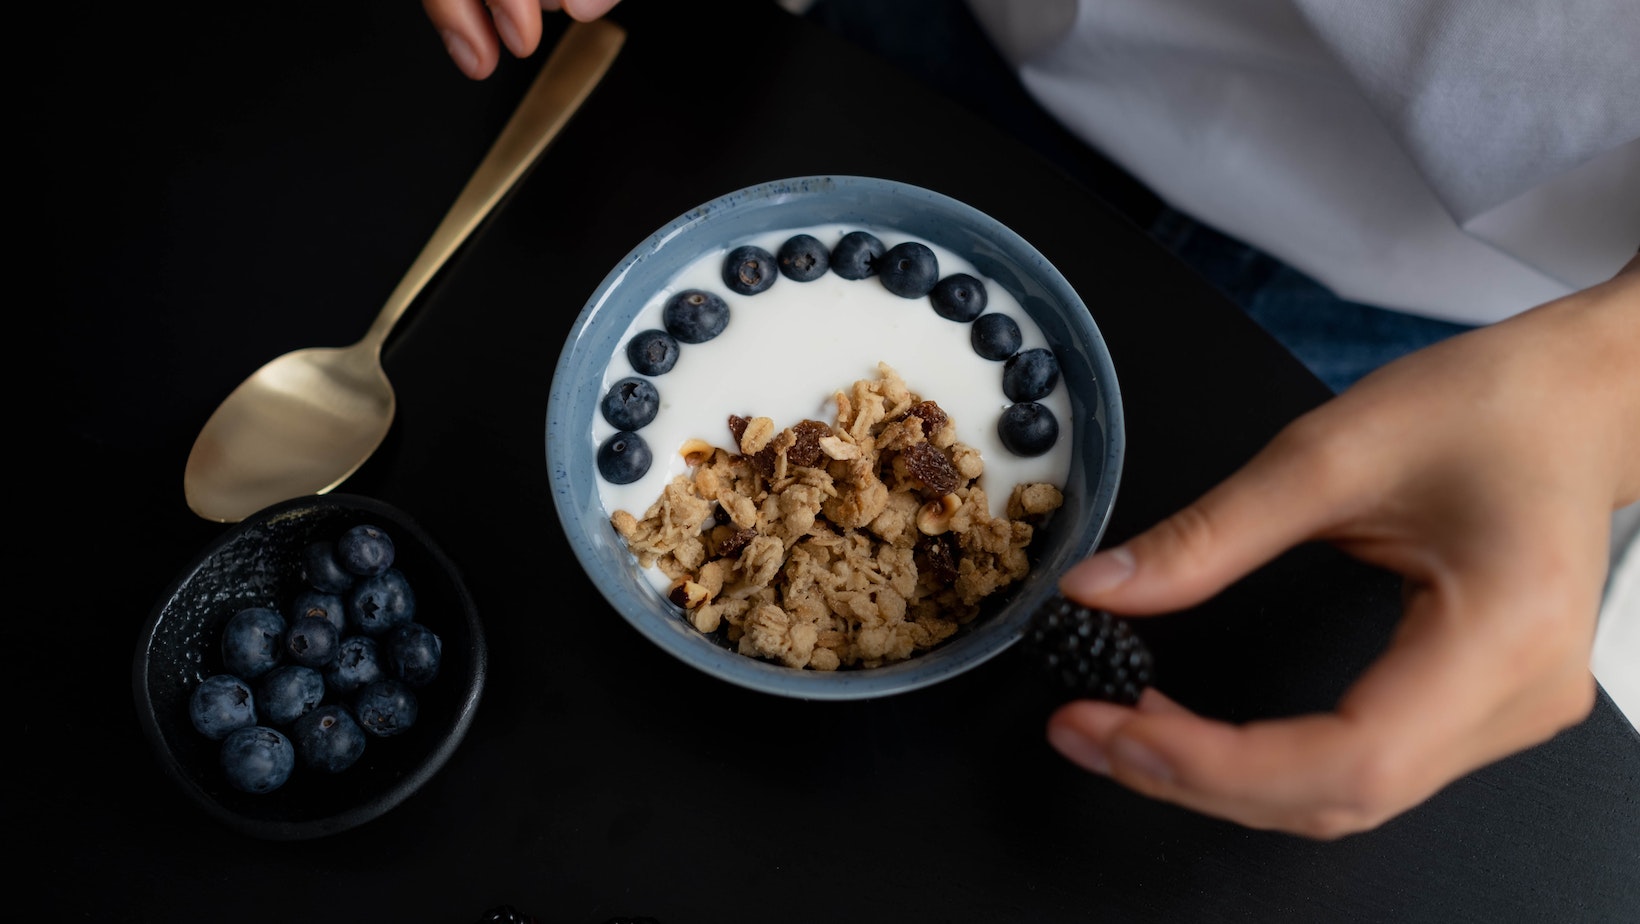 is keto granola good for you